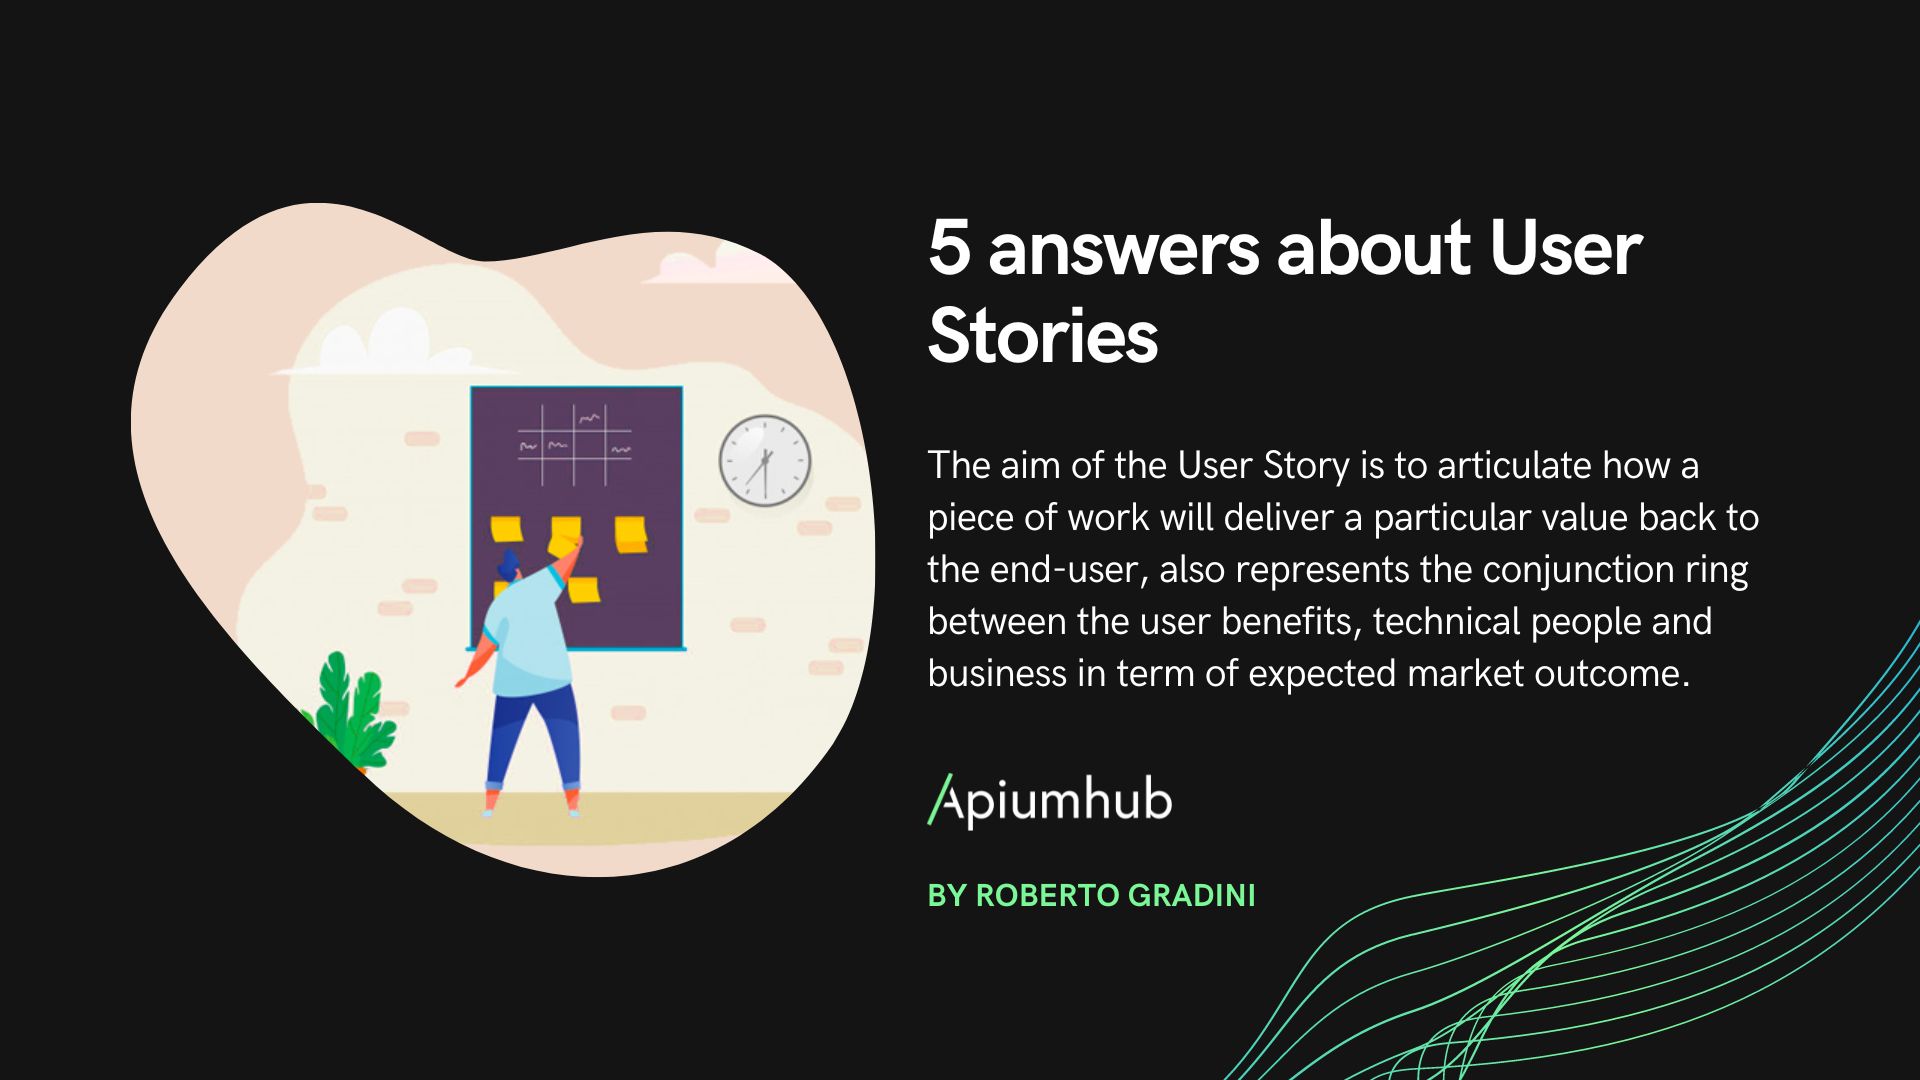 5 answers about User Stories